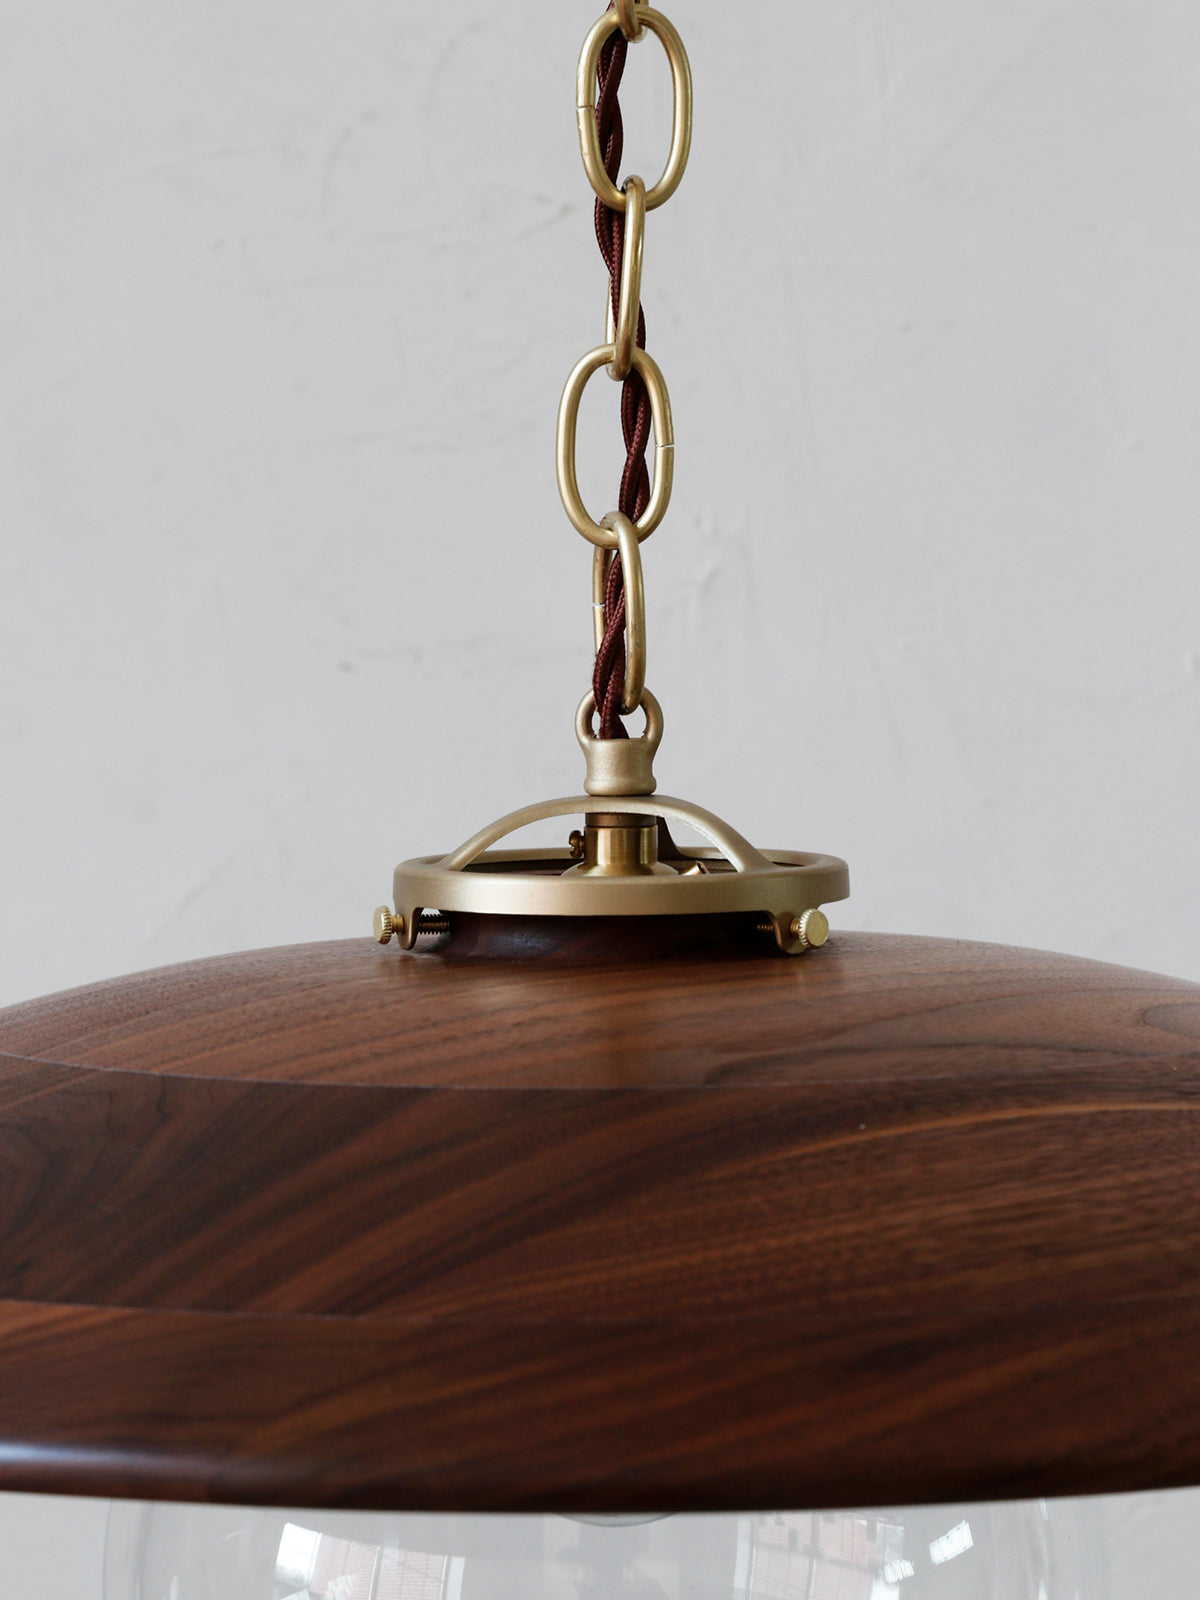 Large pendant light with oversized clear glass globe and decorative wooden black walnut shade with brass chain